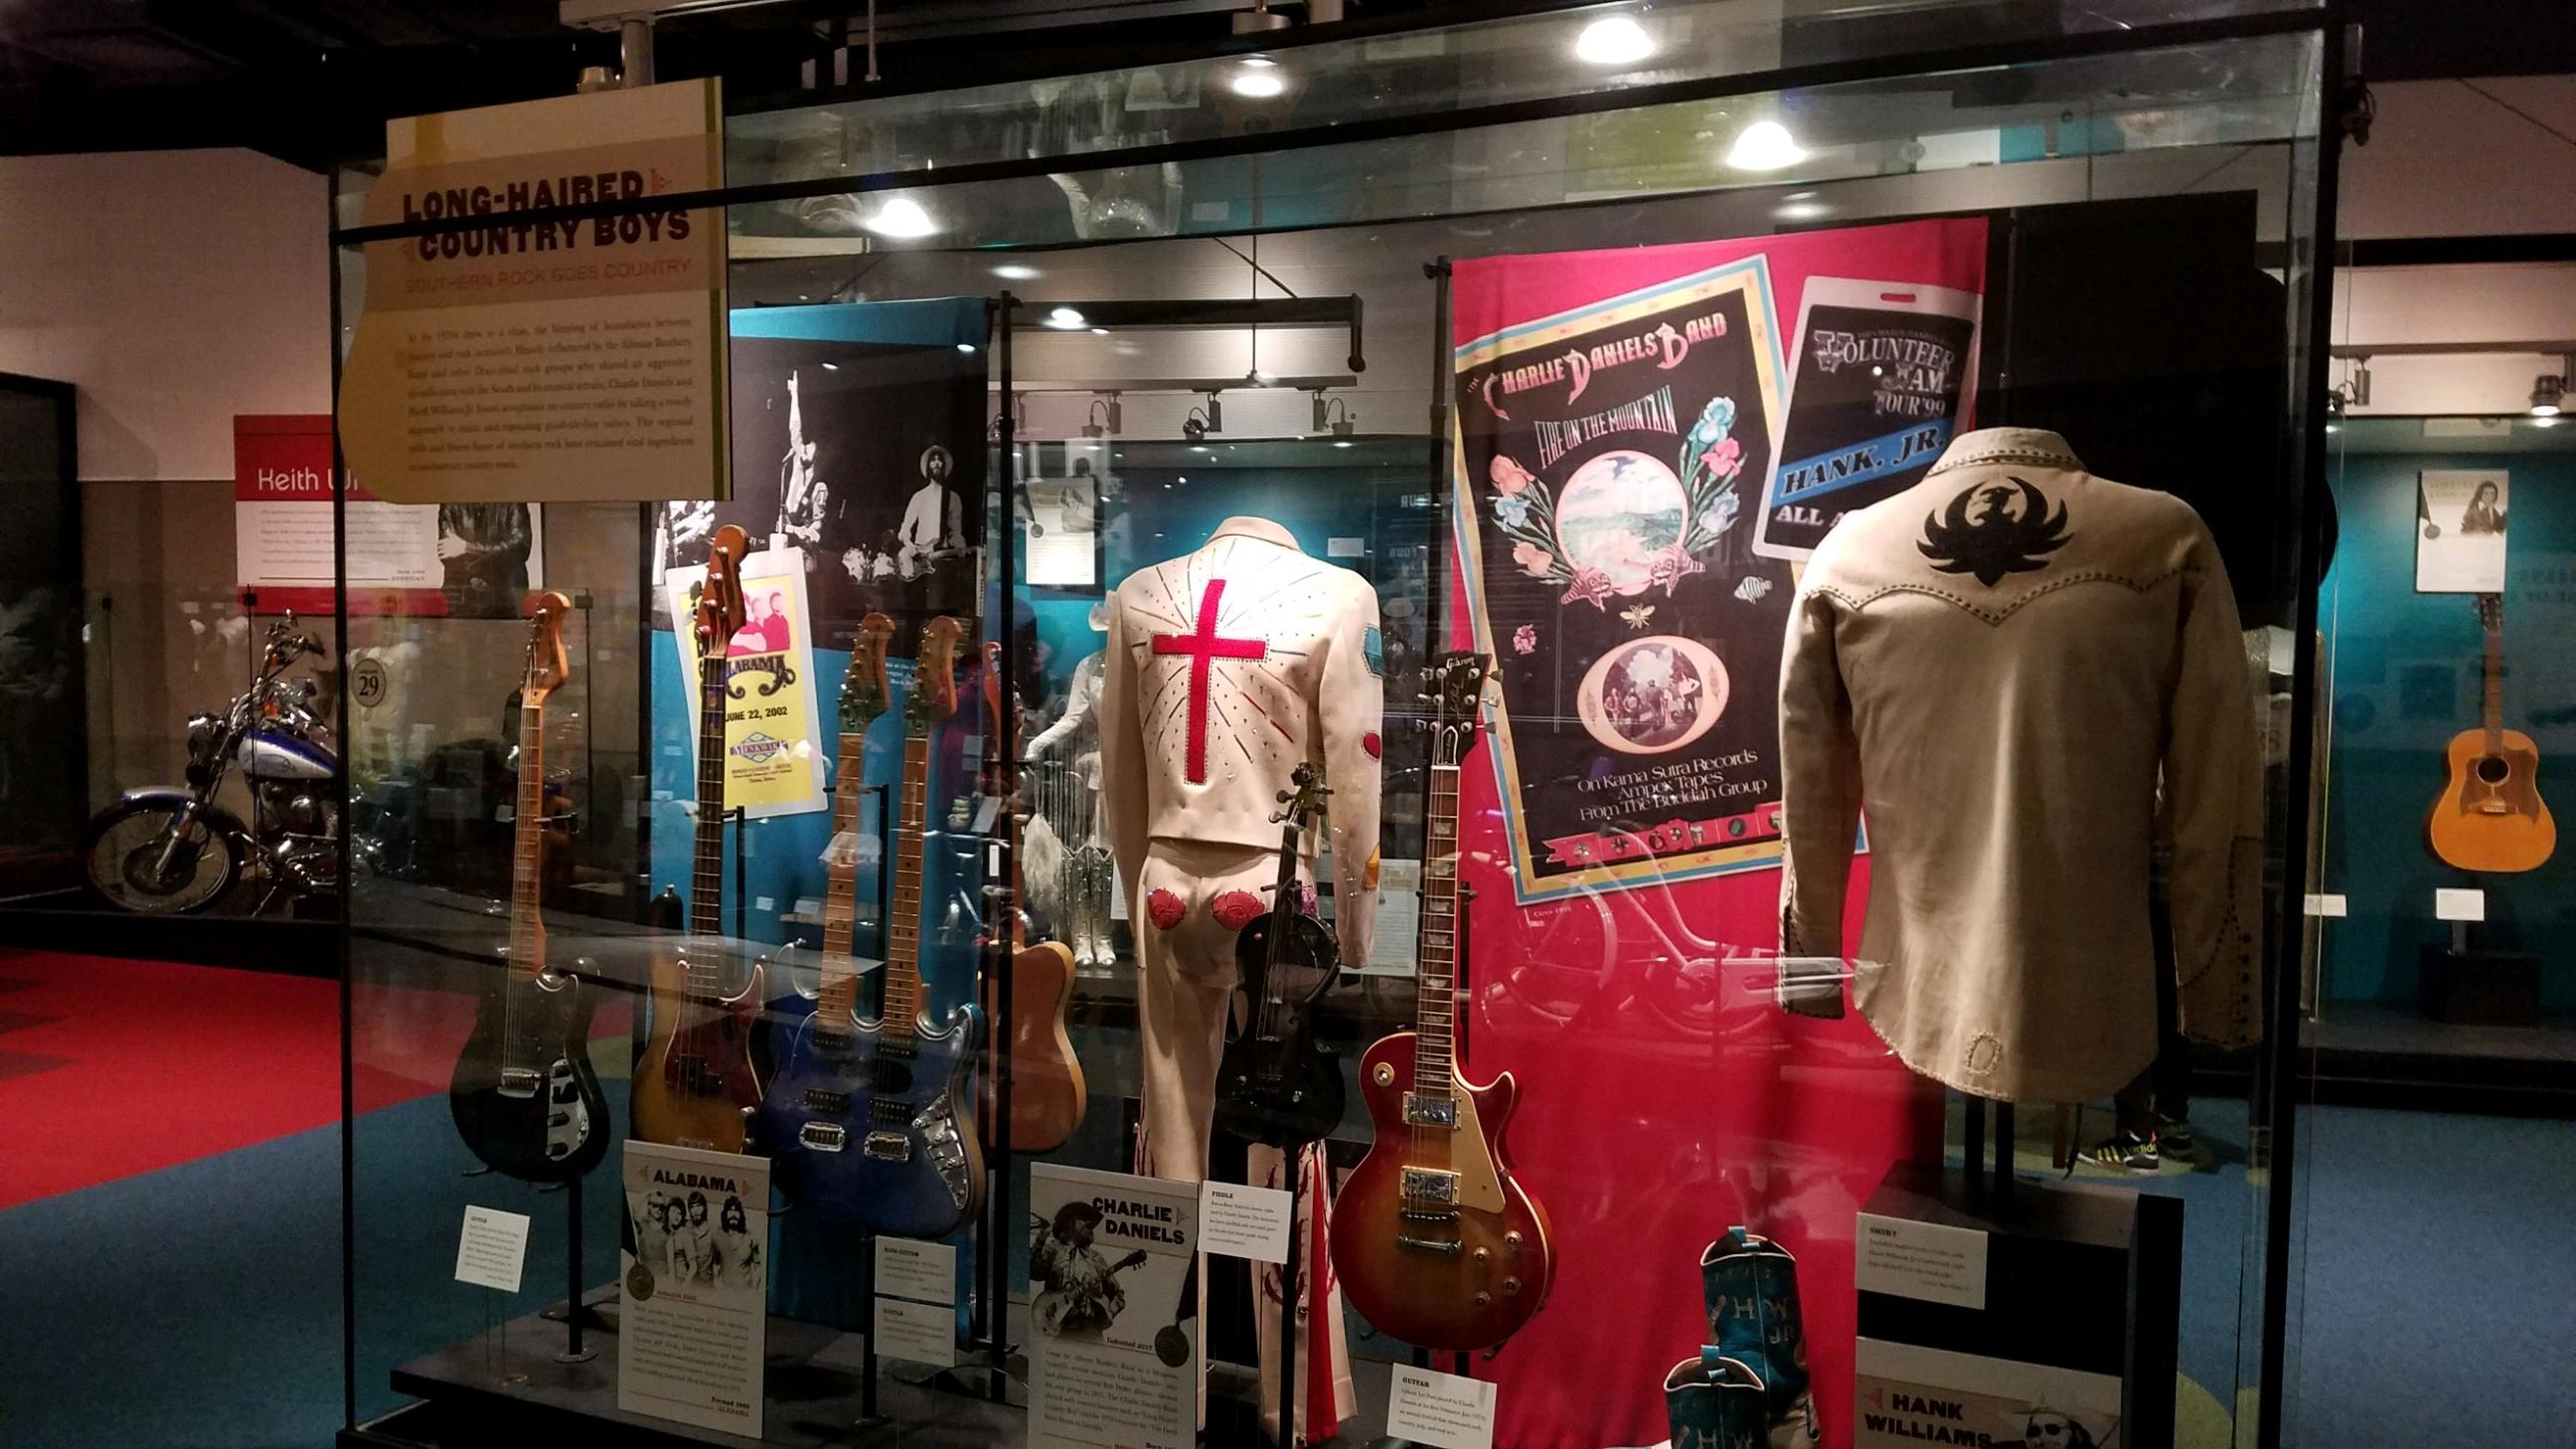 Exhibits inside the Country Music Hall of Fame